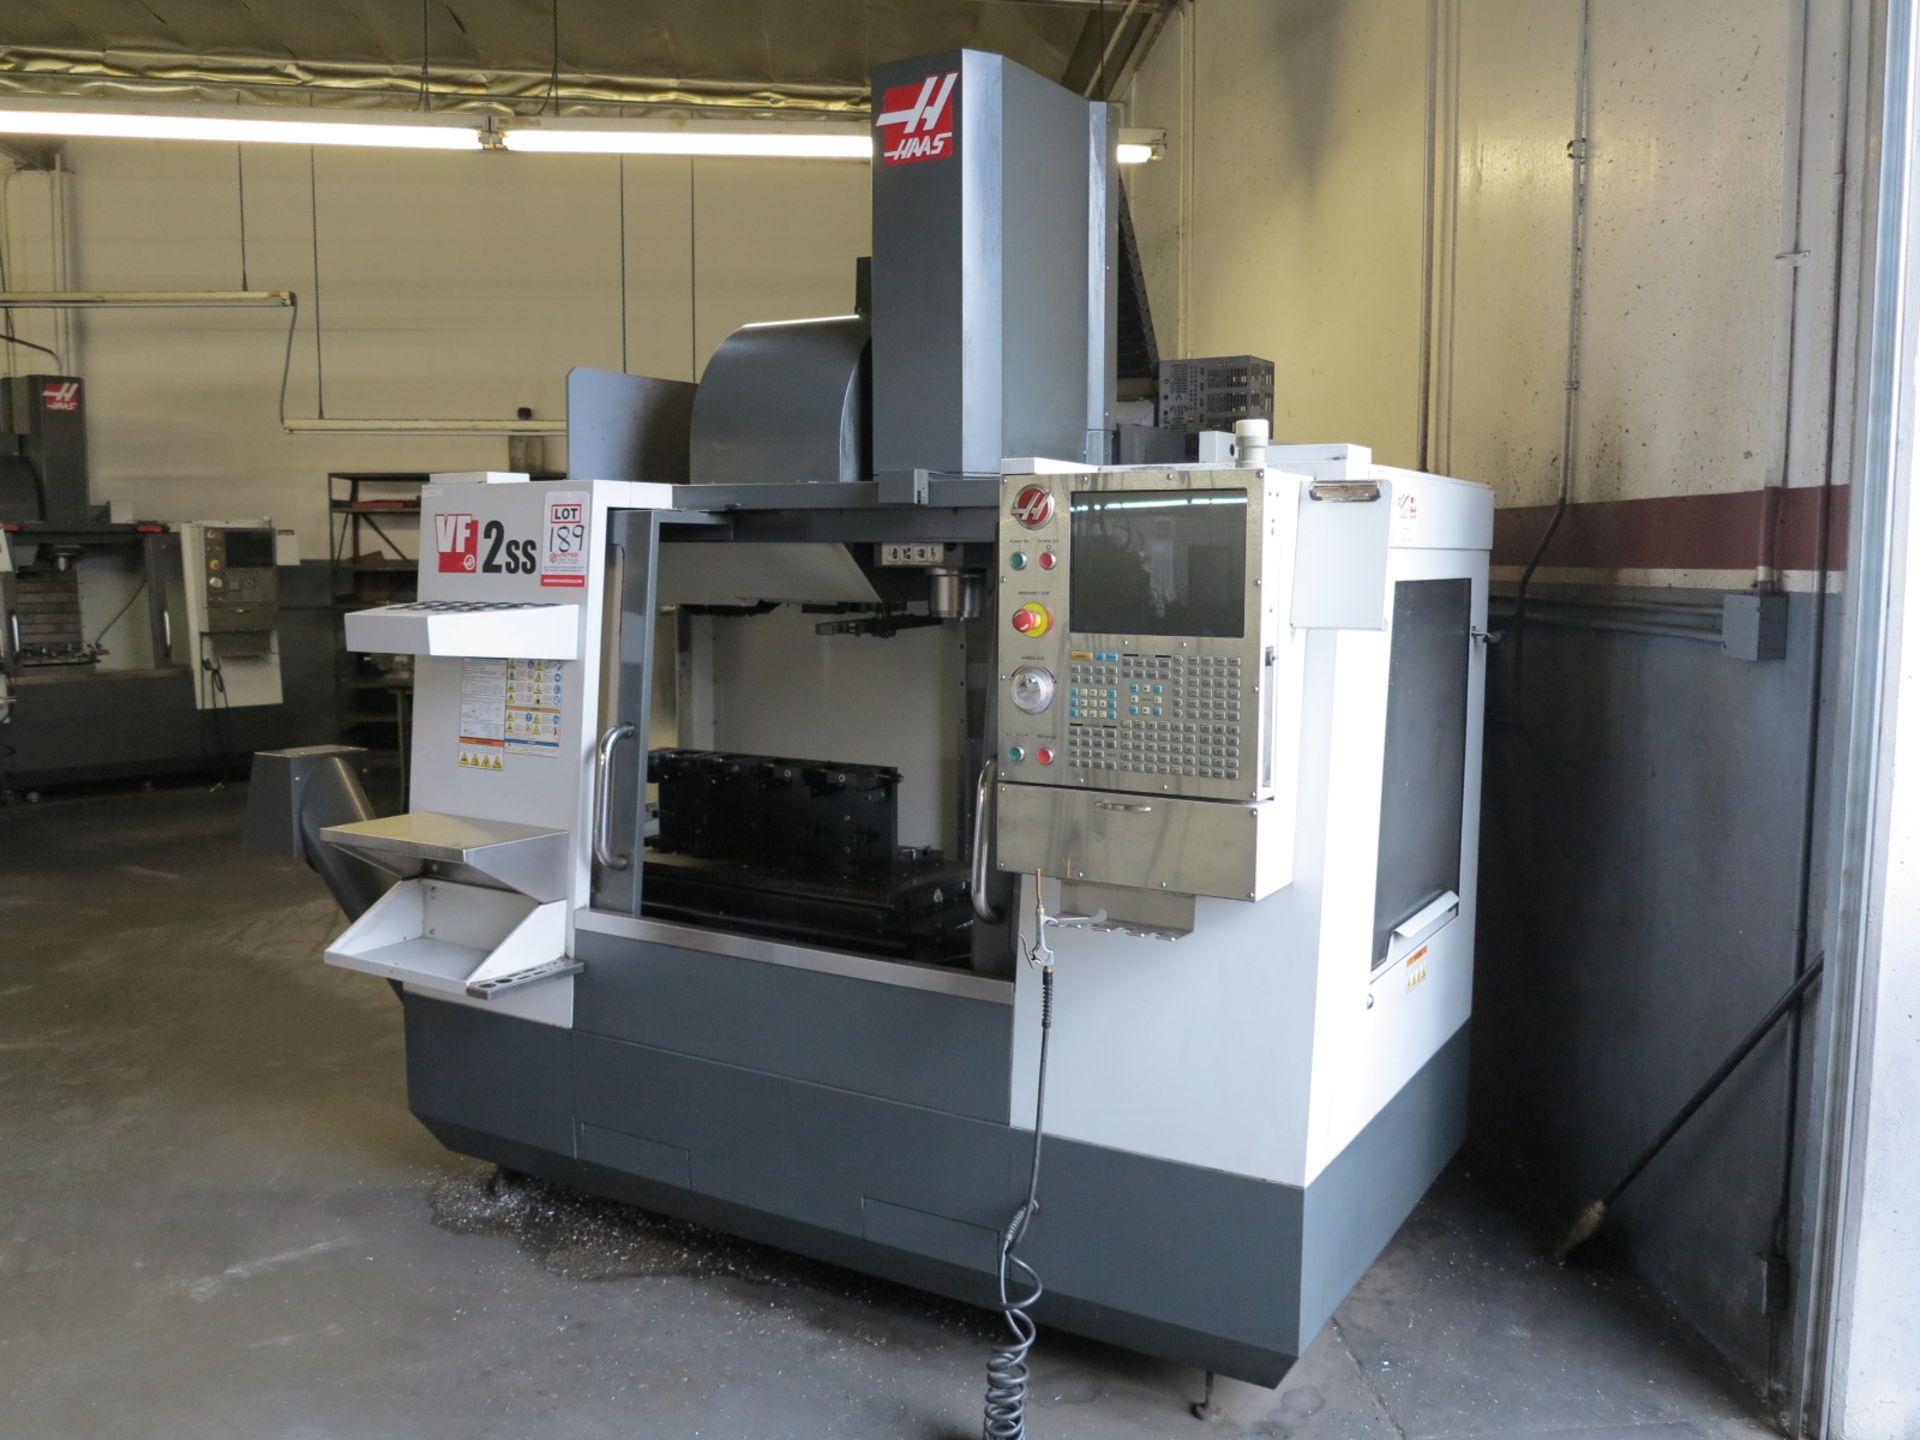 2010 HAAS VF-2SS CNC VERTICAL MACHINING CENTERS, S/N 1078731, 30" X, 16" Y, 20" Z, 36" X 14" - Image 4 of 7